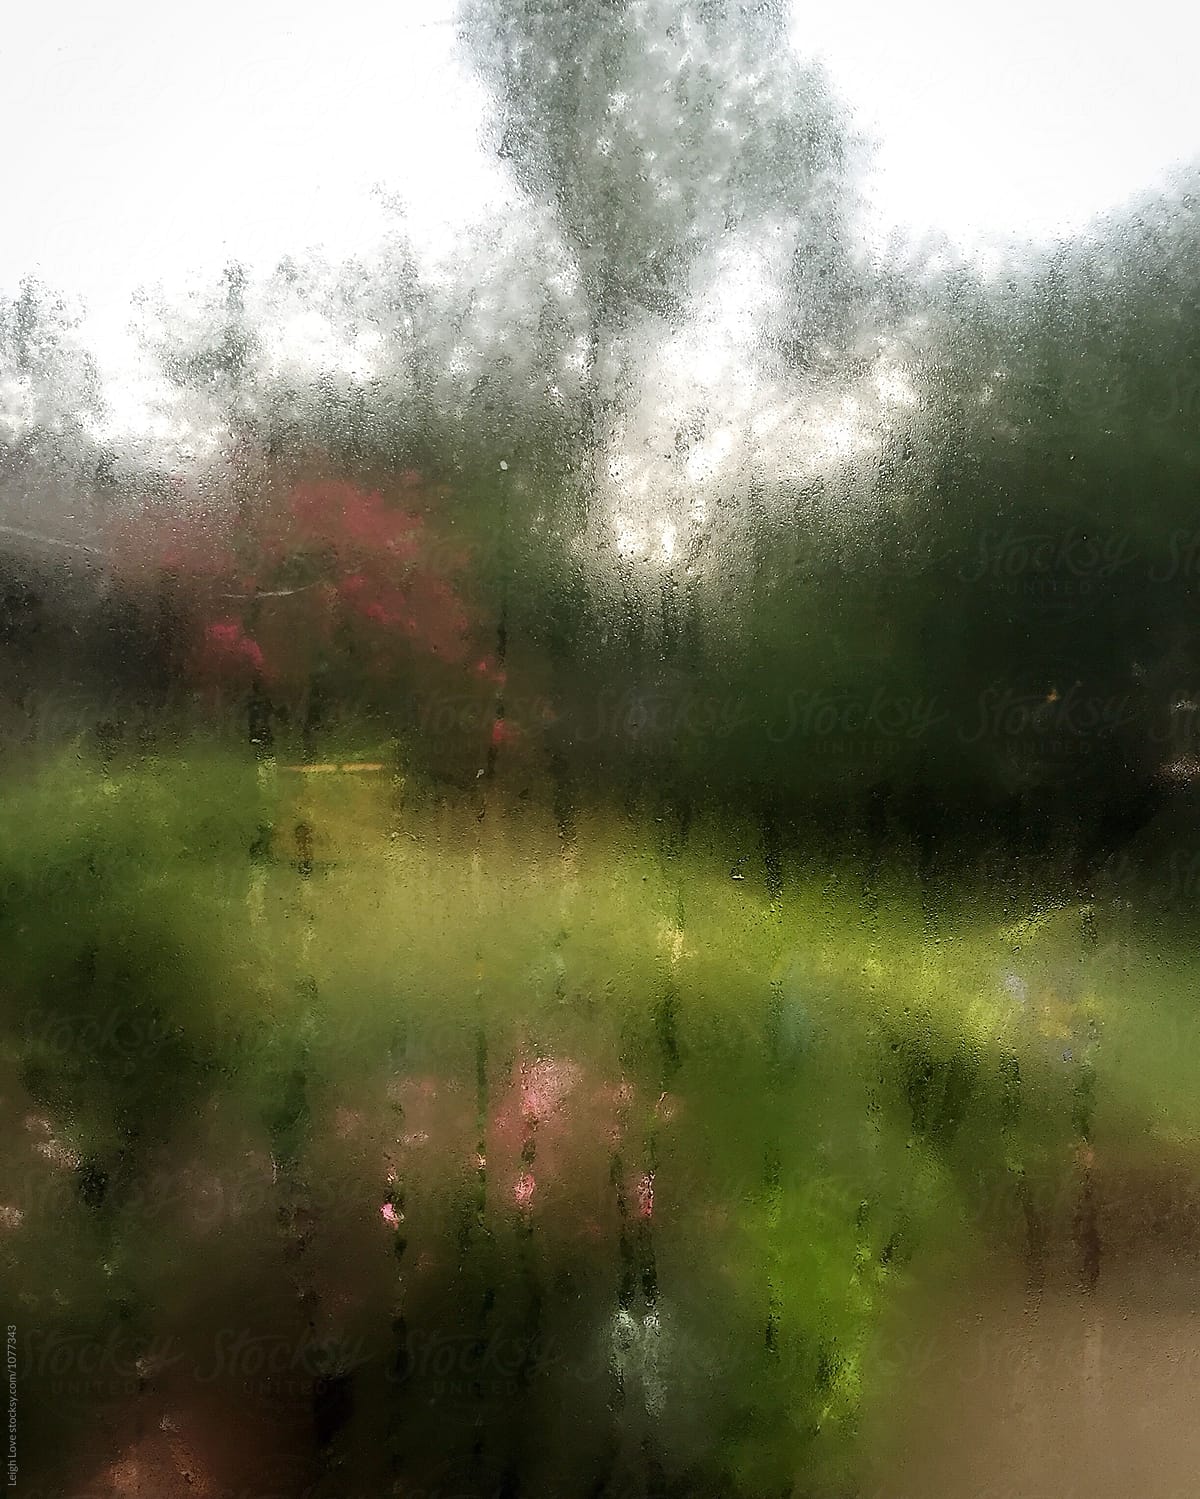 Looking Out Through A Fogged Up Window